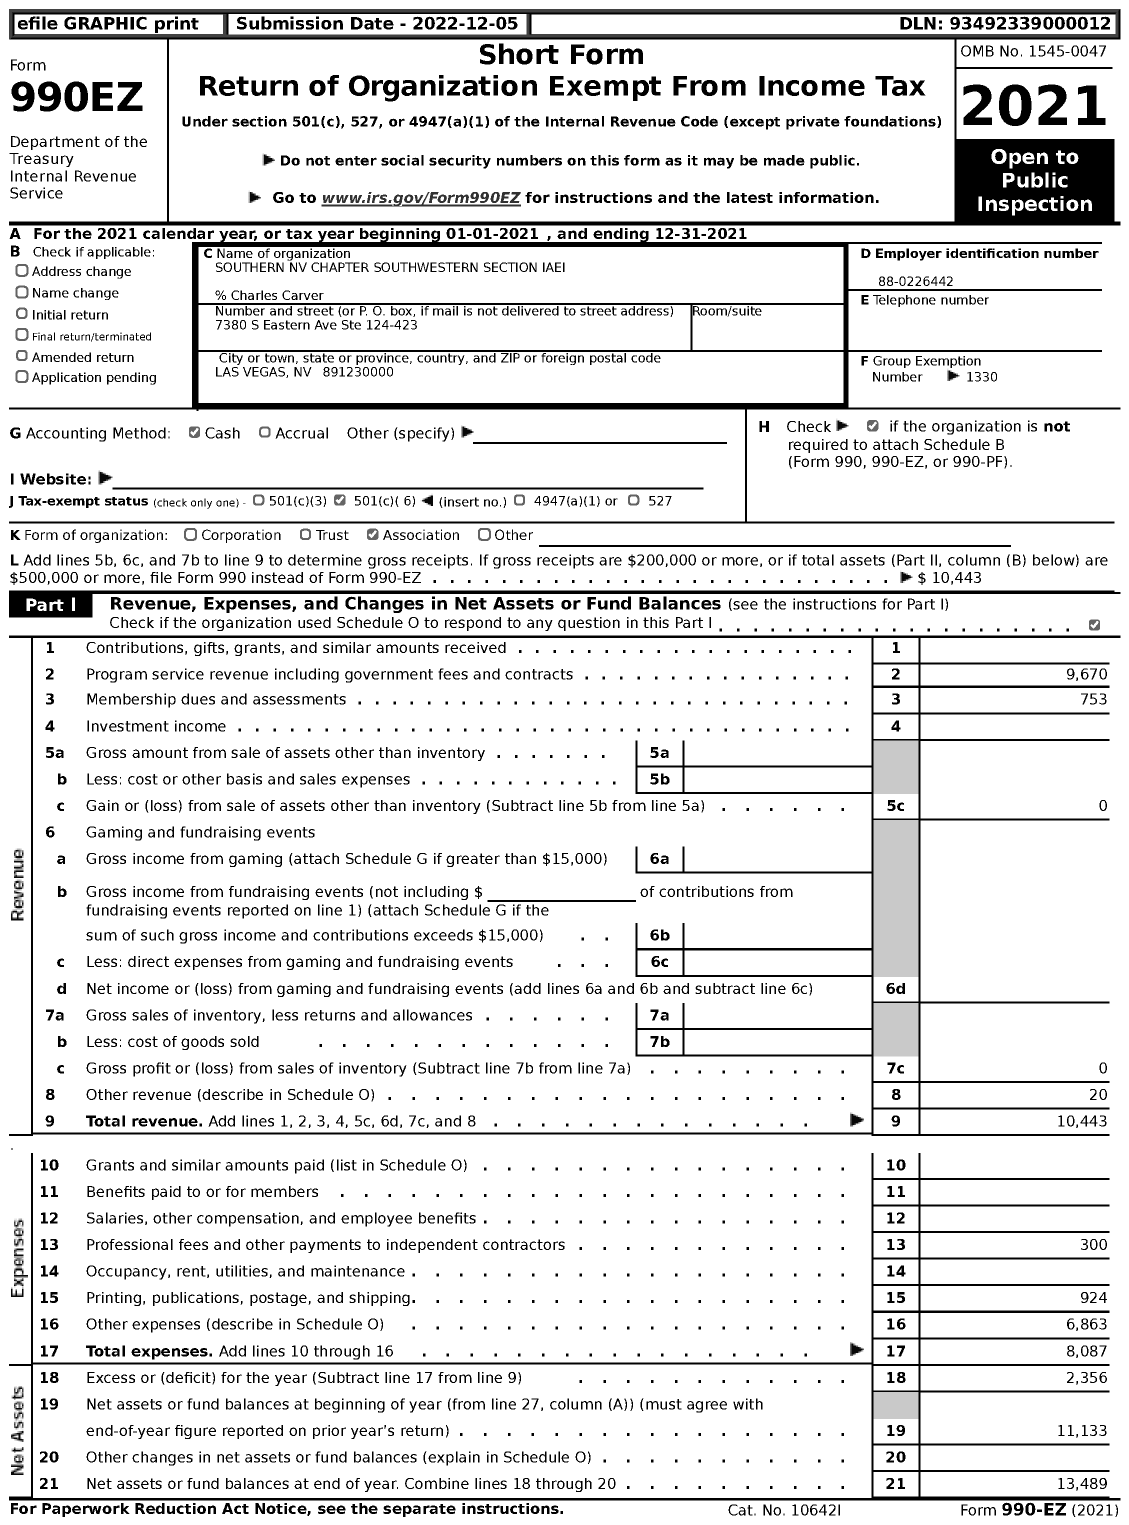 Image of first page of 2021 Form 990EZ for Southern NV Chapter Southwestern Section Iaei